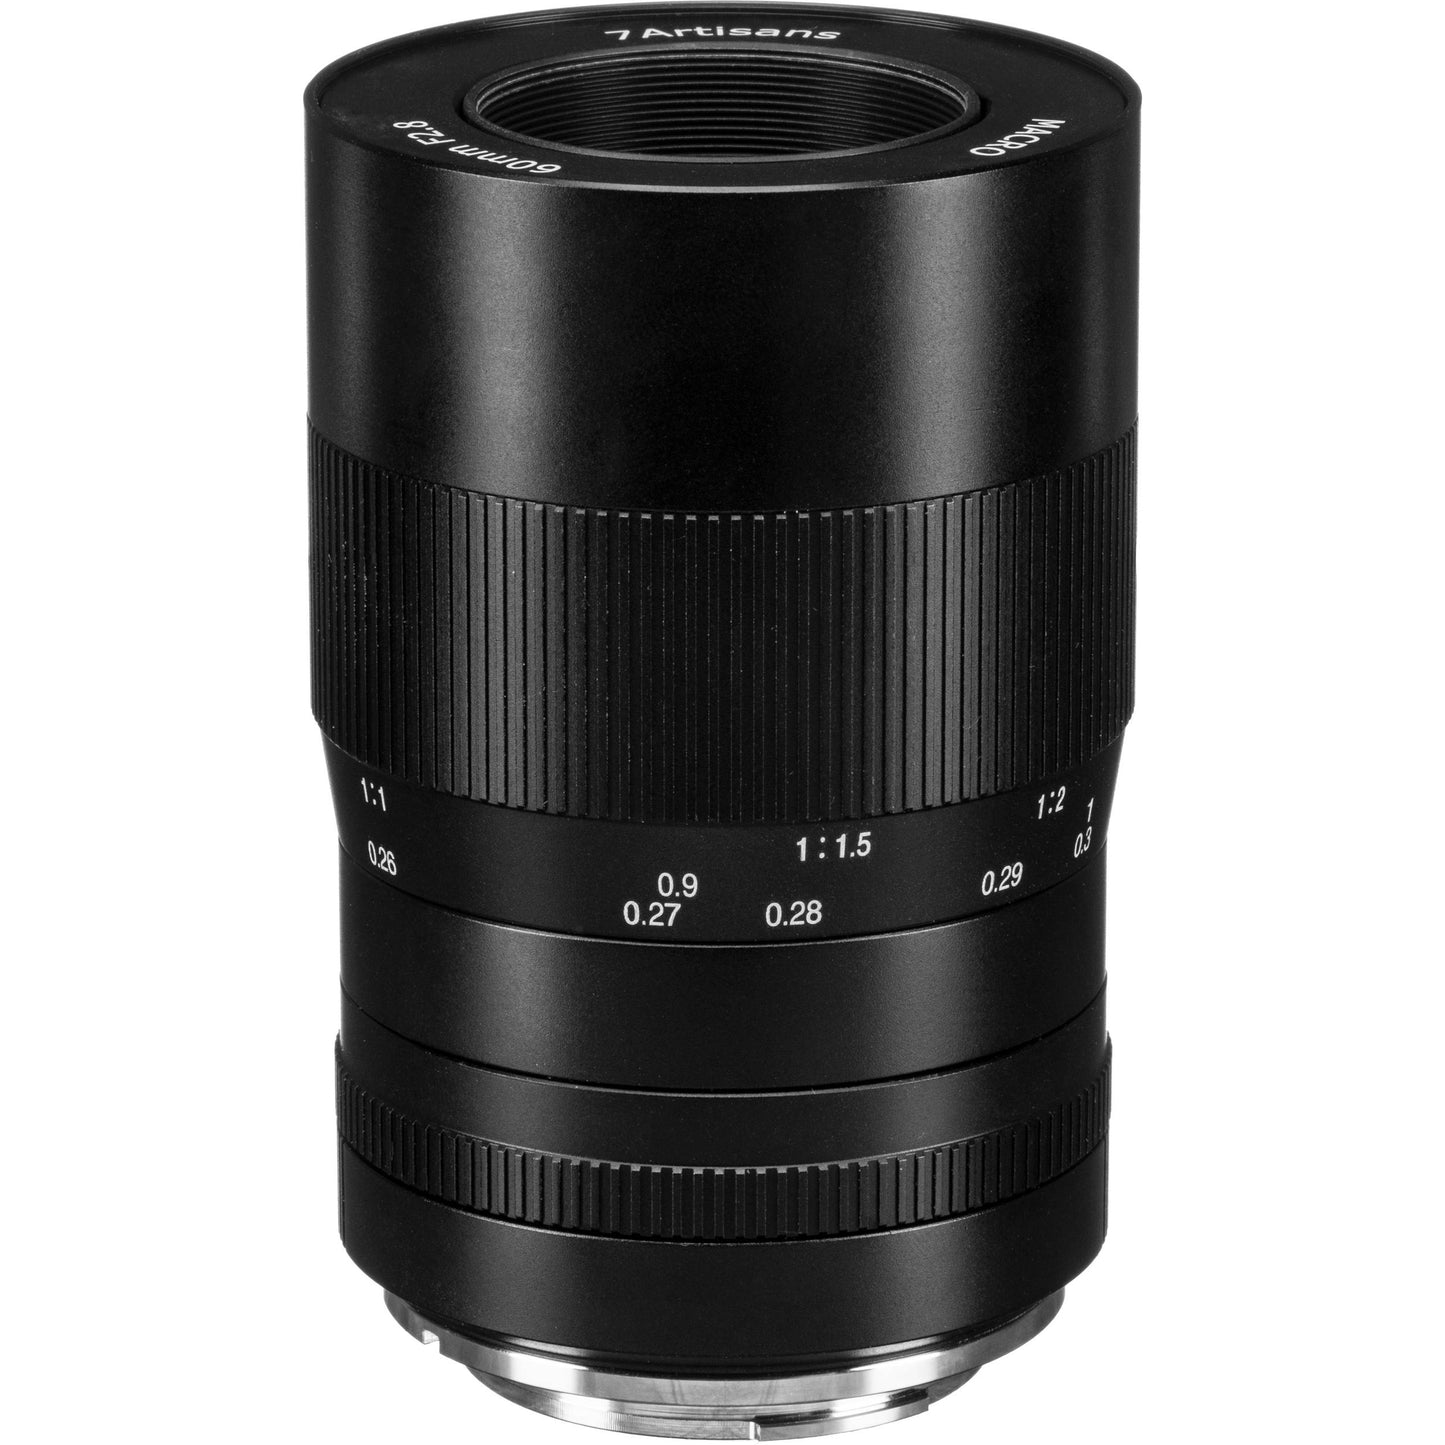 7Artisans 60mm f2.8 APS-C Manual Macro Photoelectric Prime Lens (E-Mount) for Sony Mirrorless Cameras